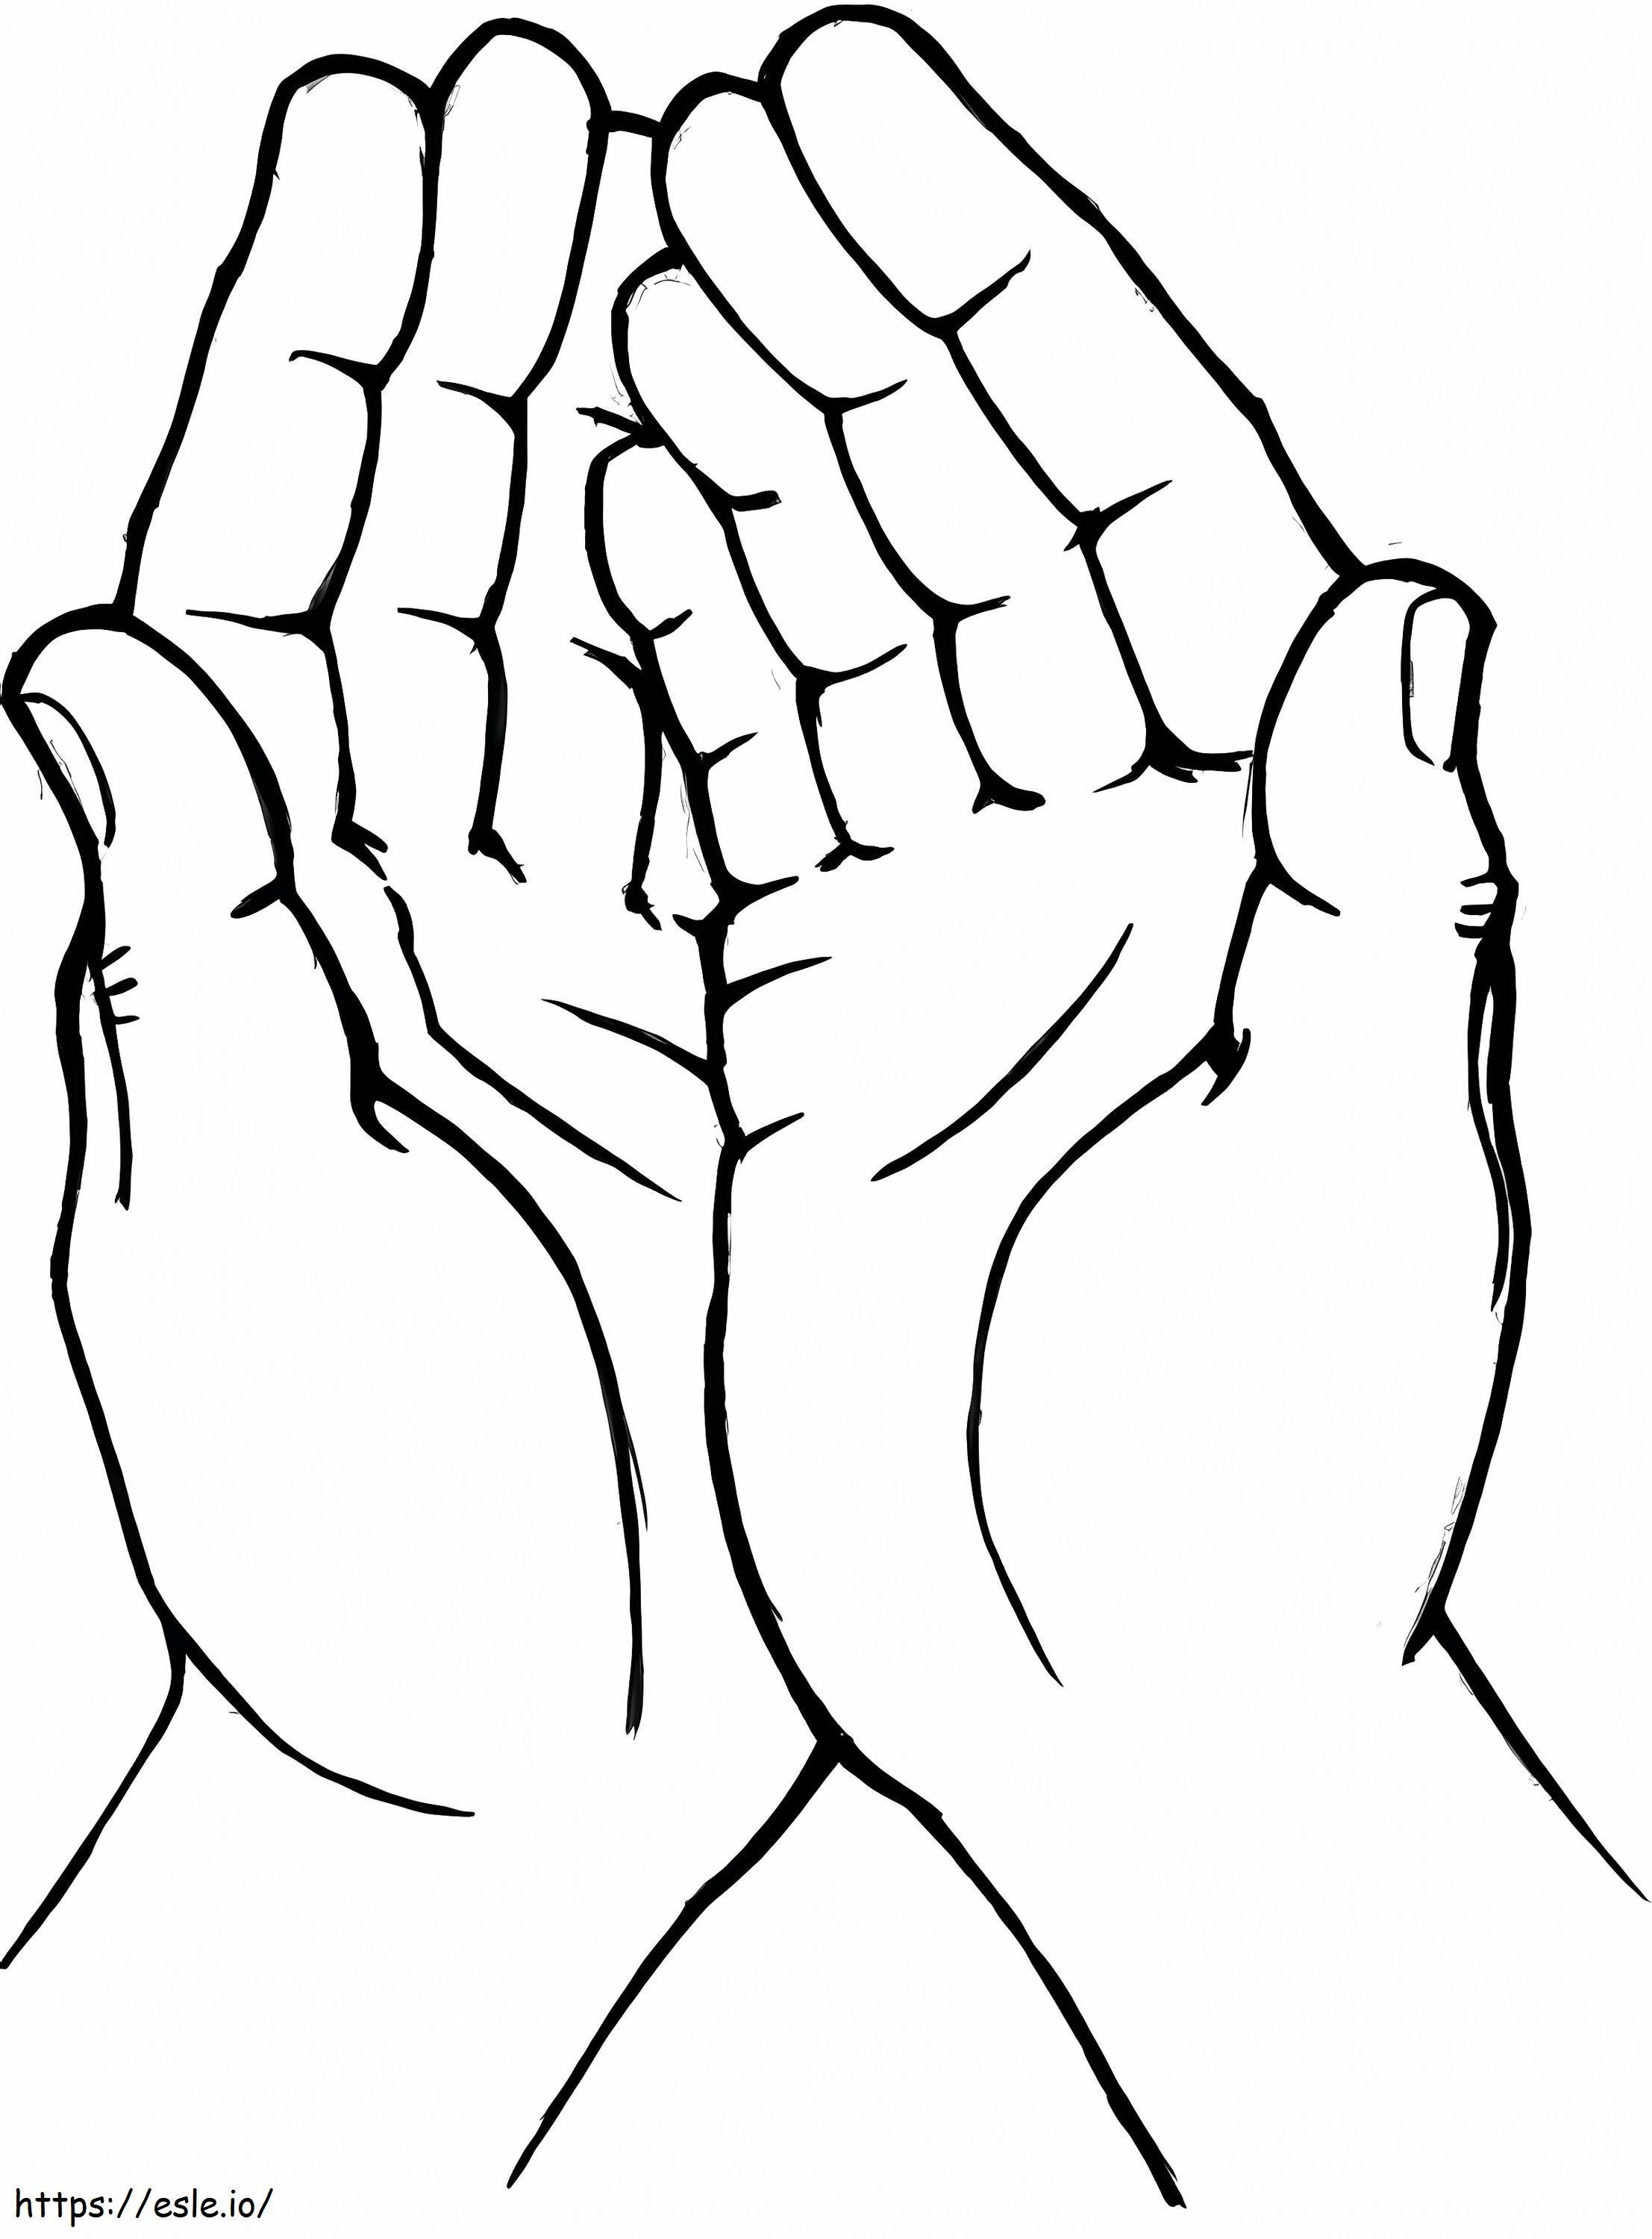 Praying Hands coloring page